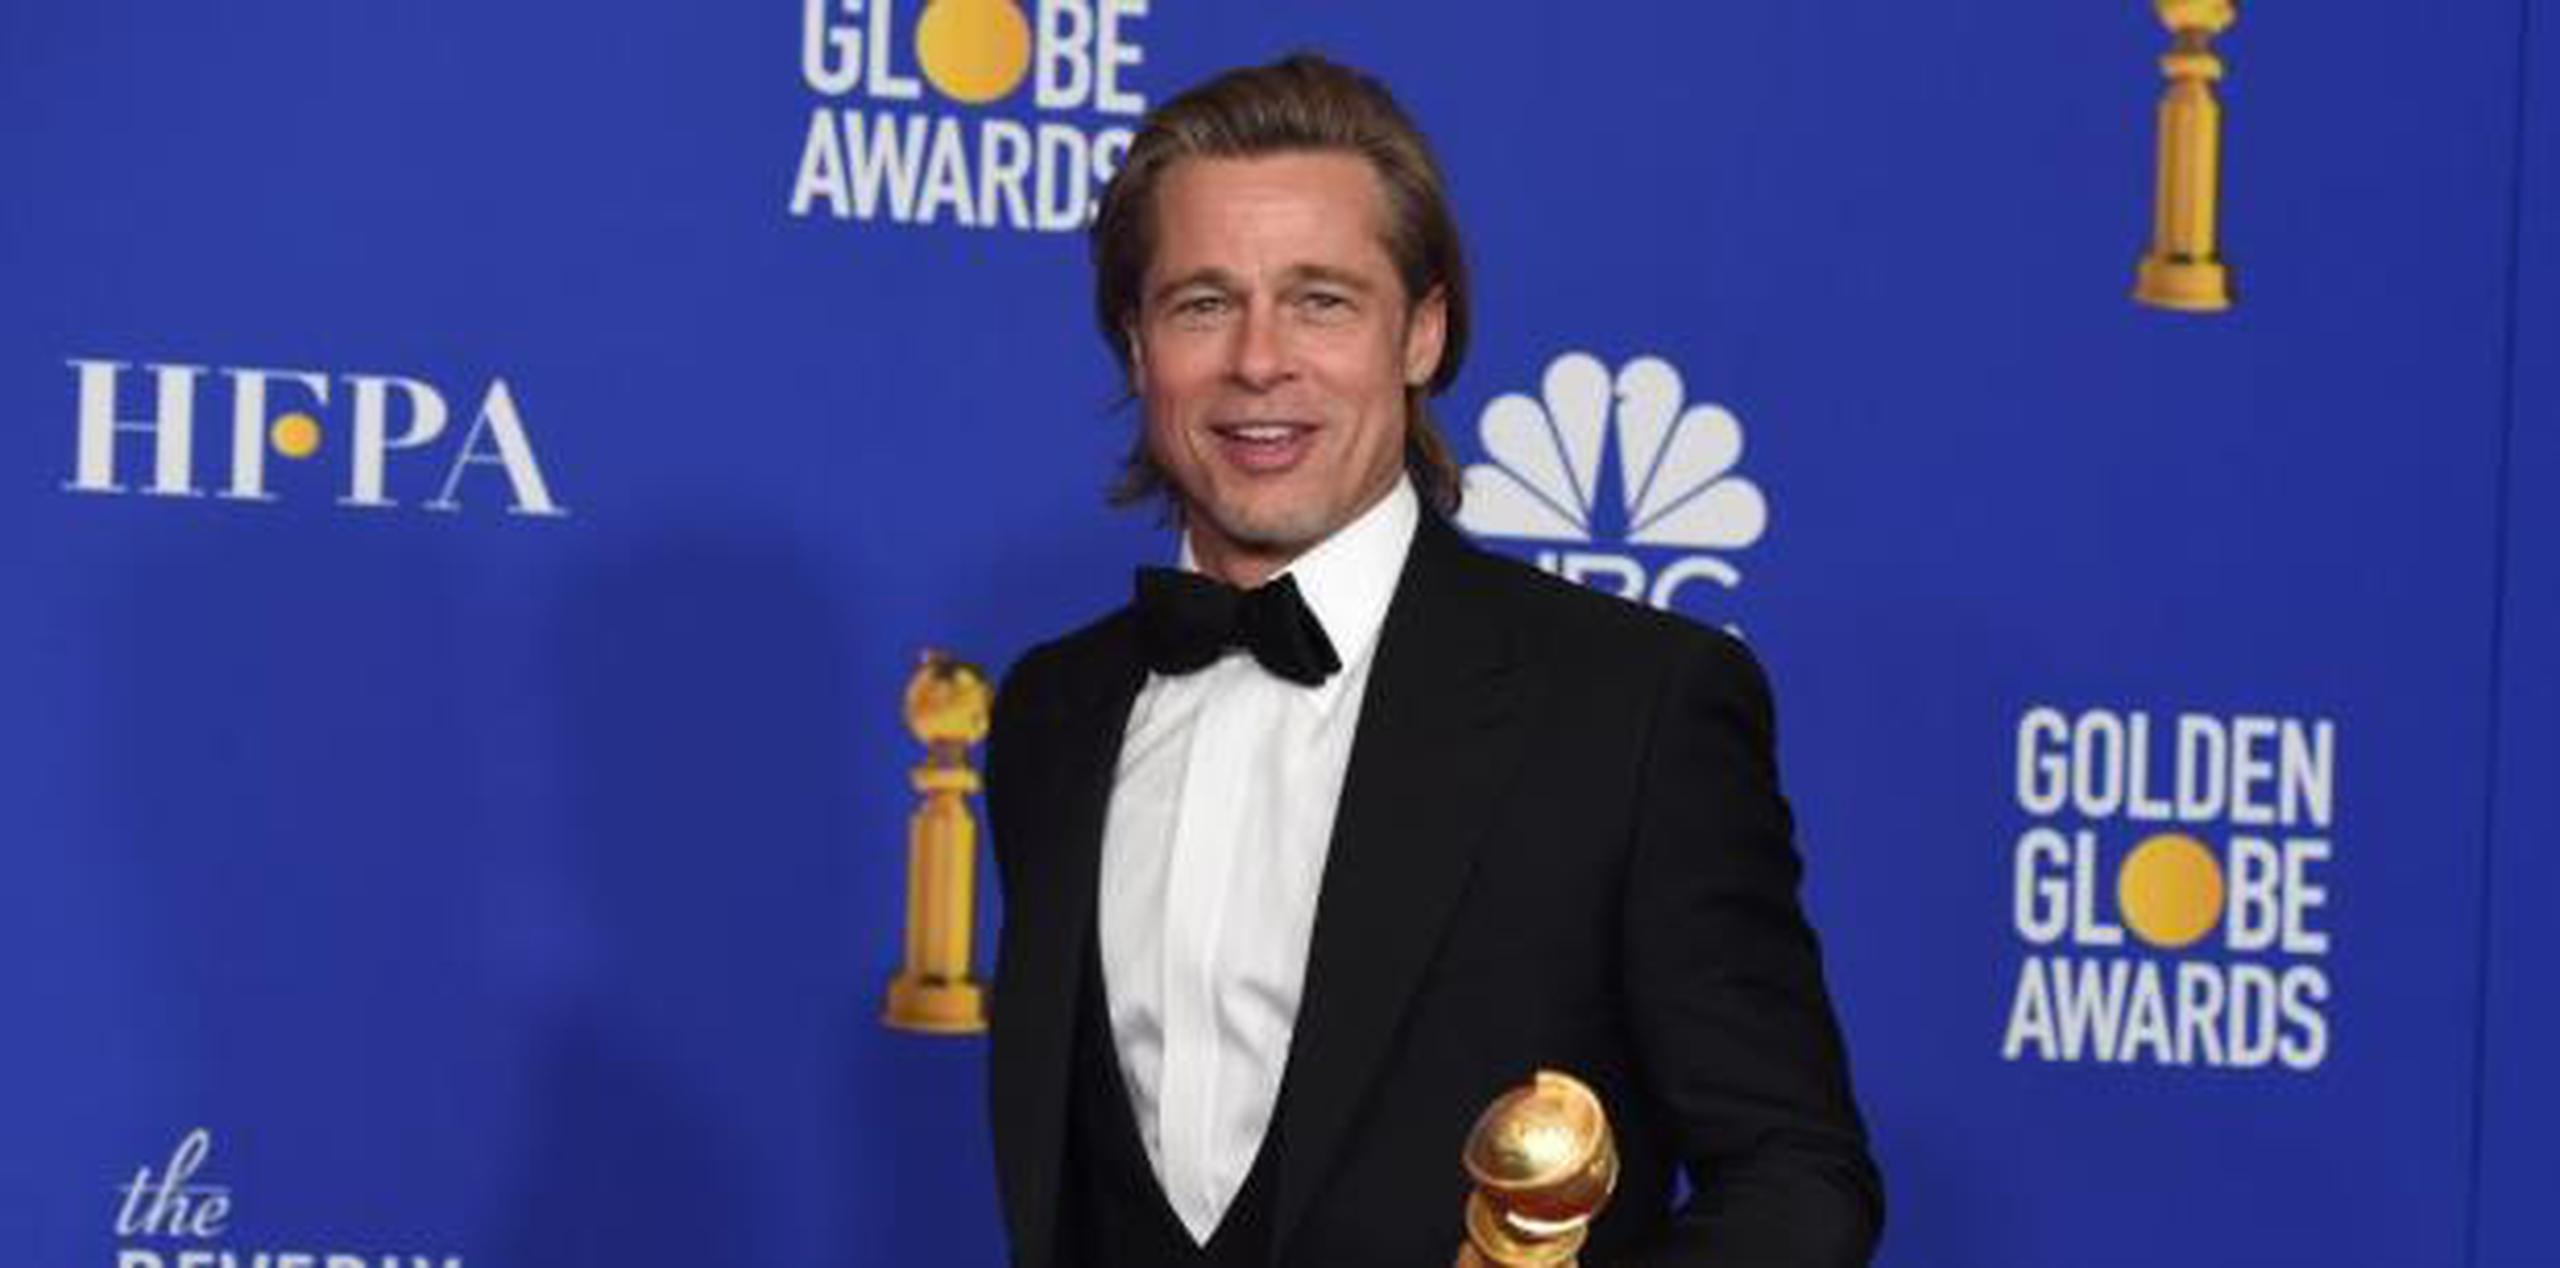 Brad Pitt forma parte del elenco en "Once Upon a Time...in Hollywood". (AP)